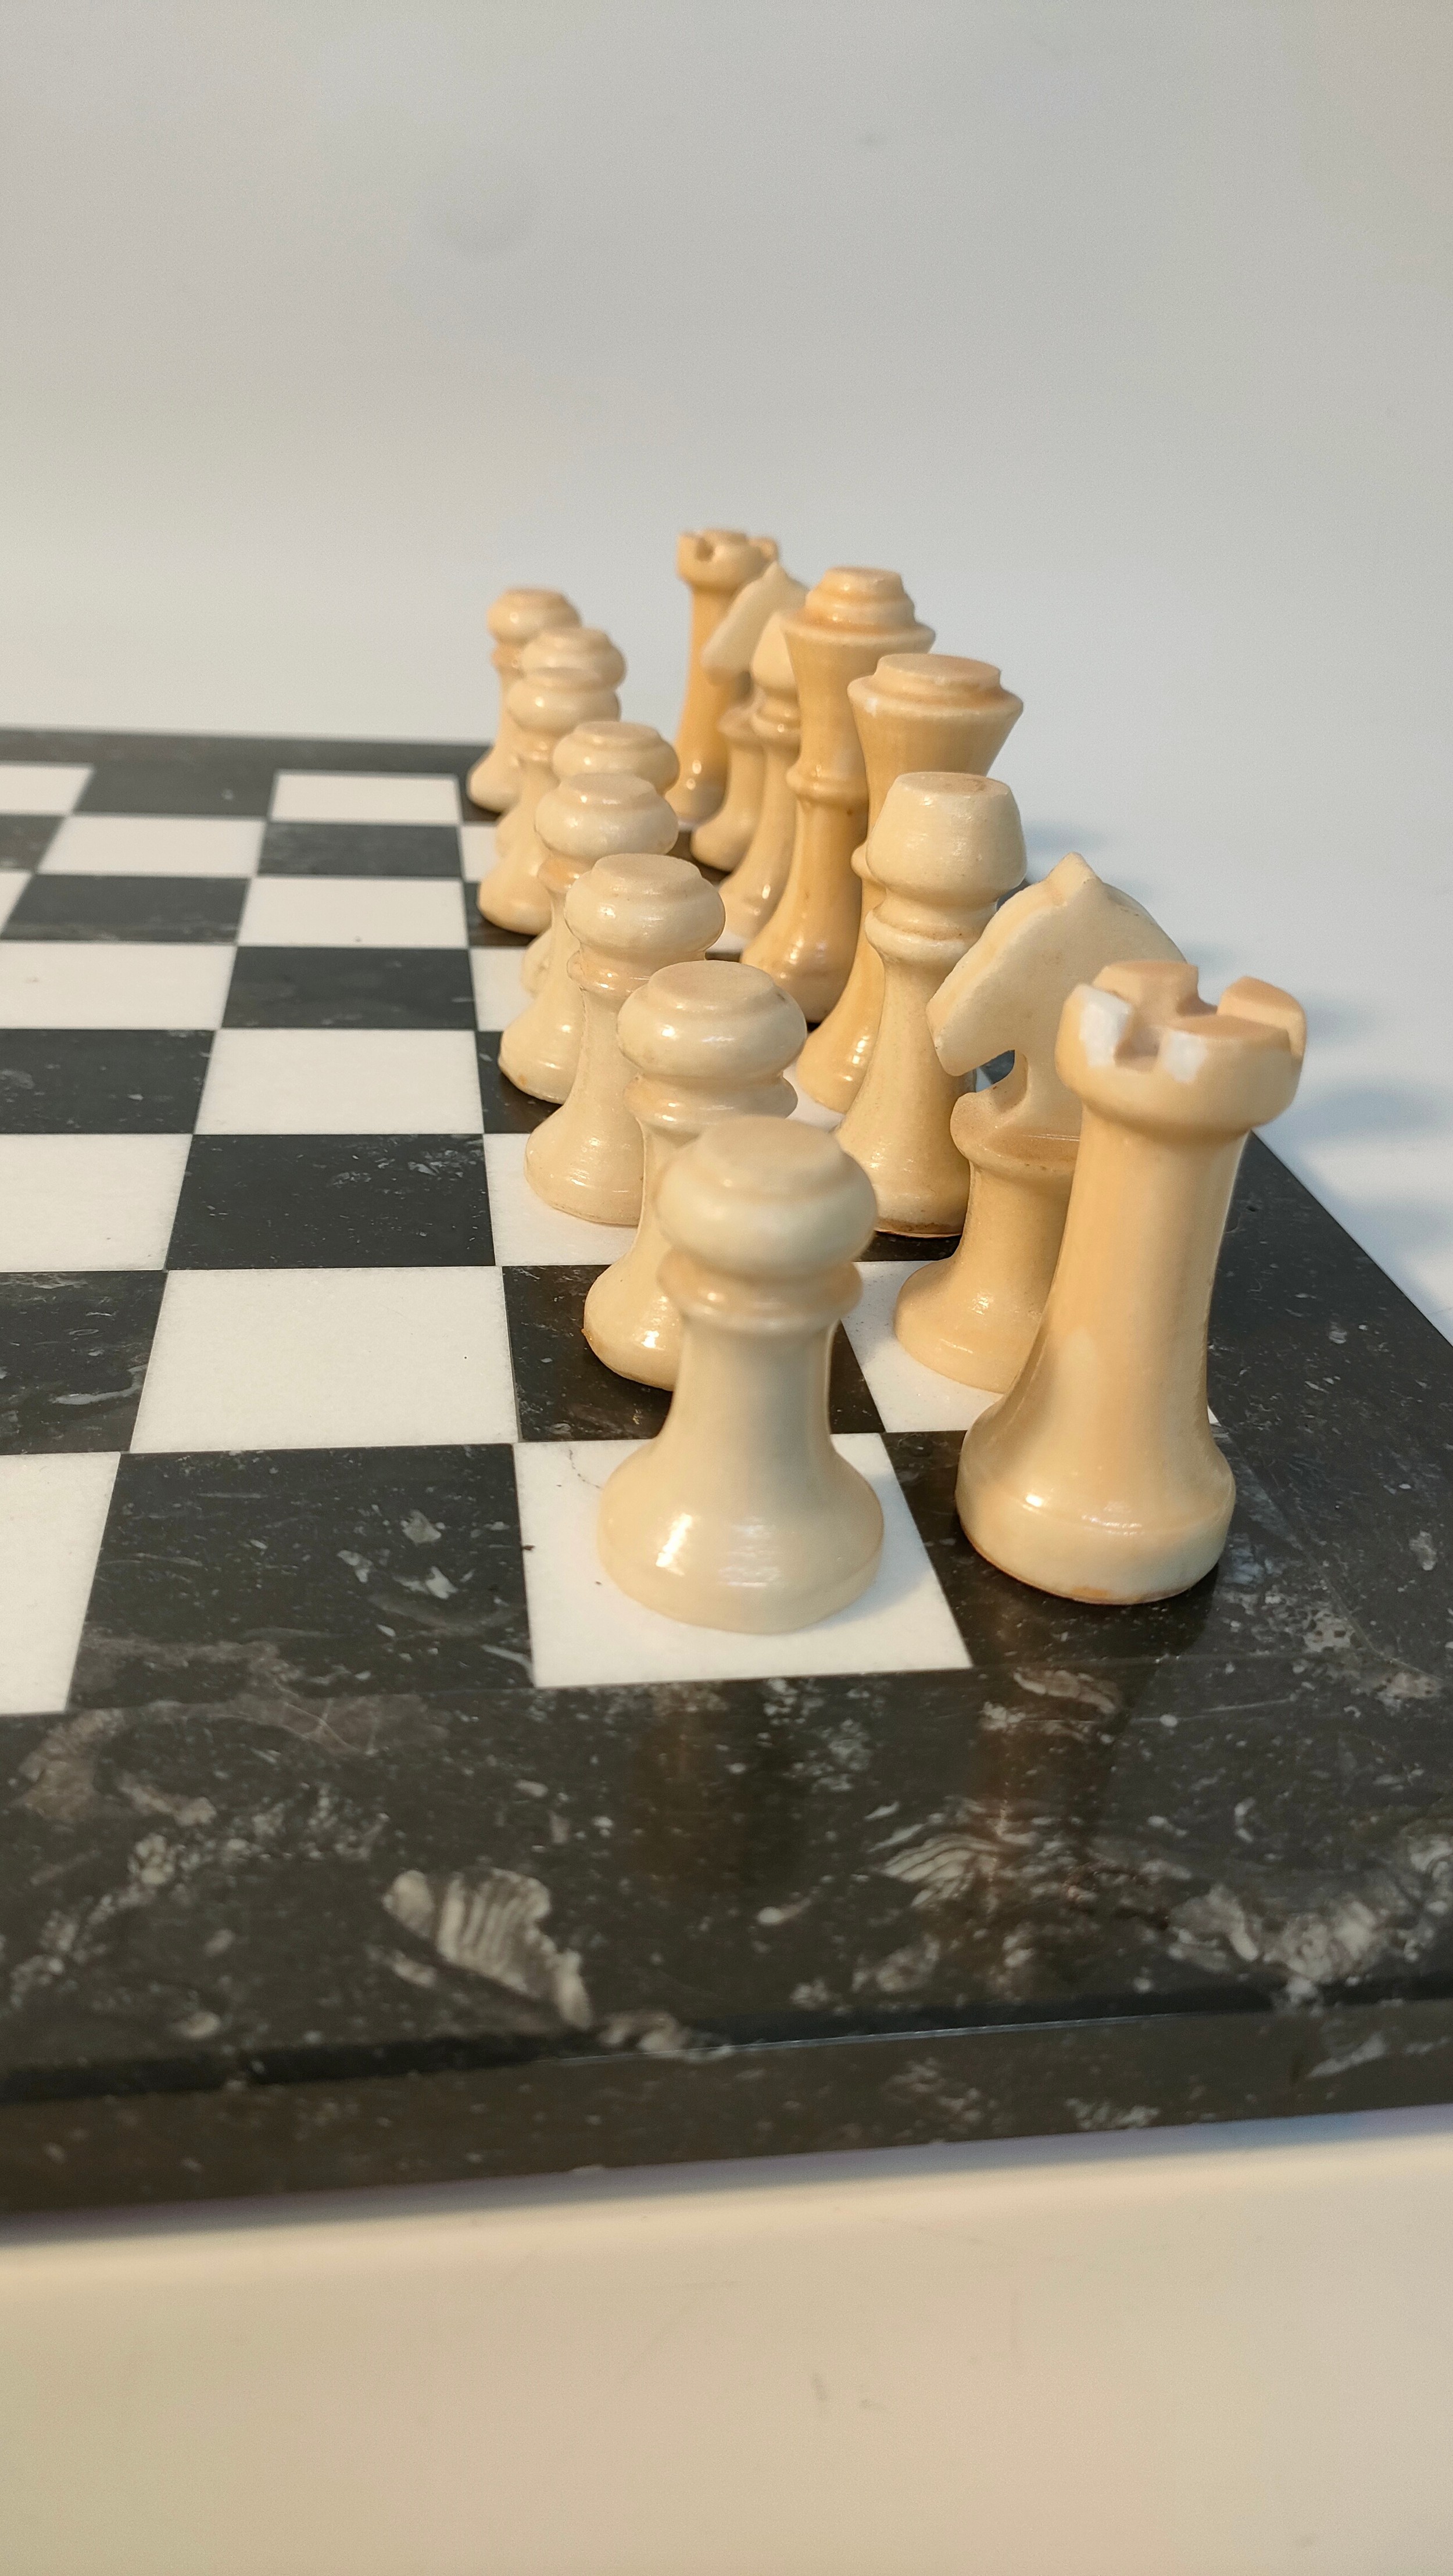 A vintage Marble black & white chess board with 32 pieces - Image 3 of 3